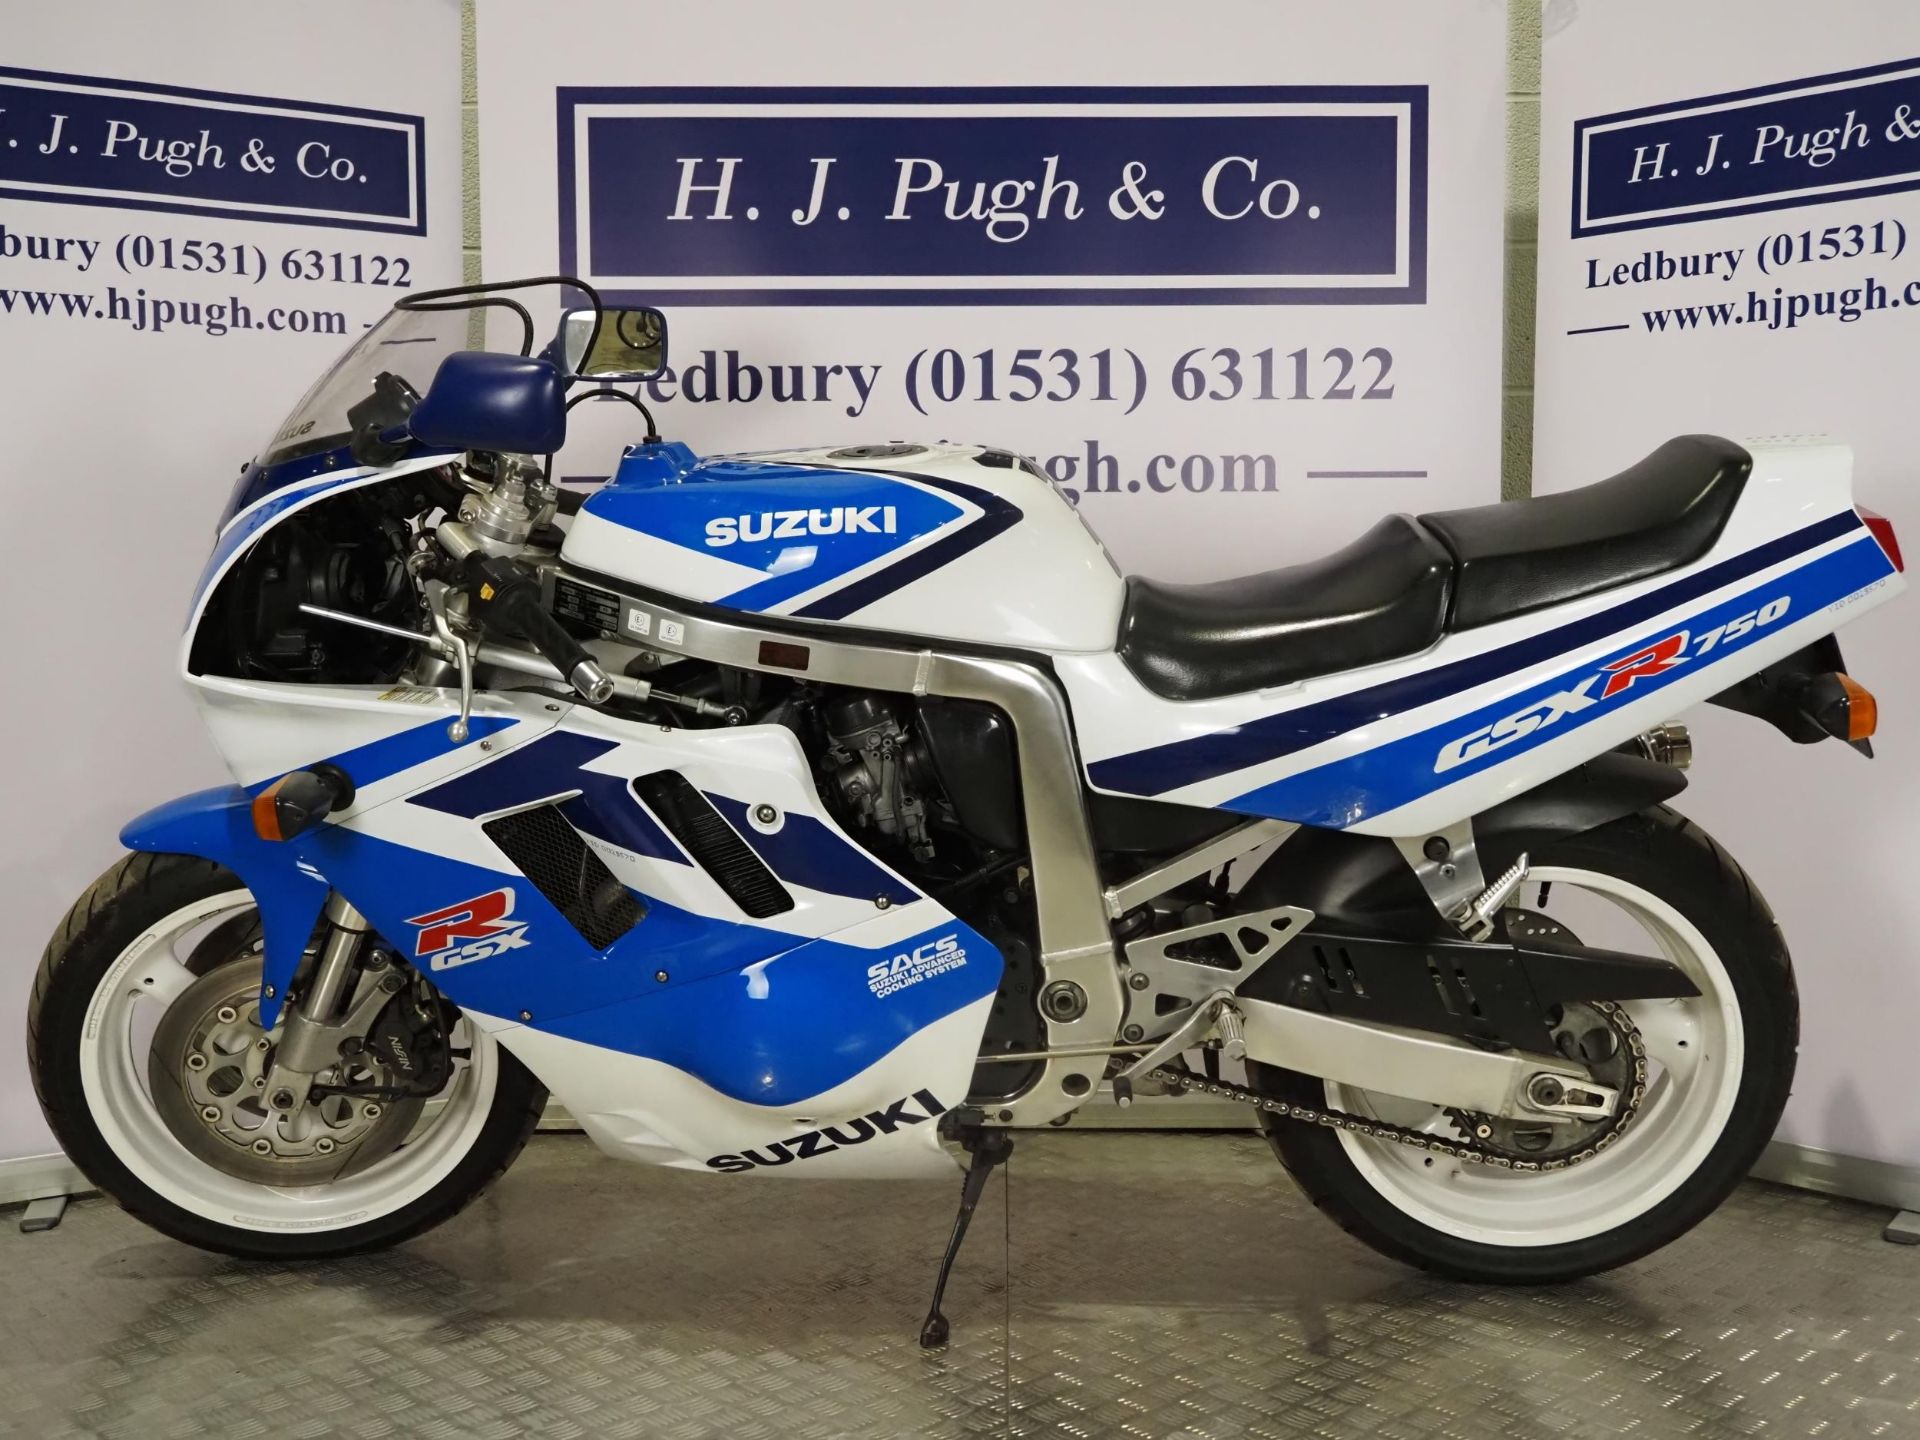 Suzuki GSXR750 motorcycle. 1991. 749cc Runs and rides but has been on display for several years so - Image 9 of 9